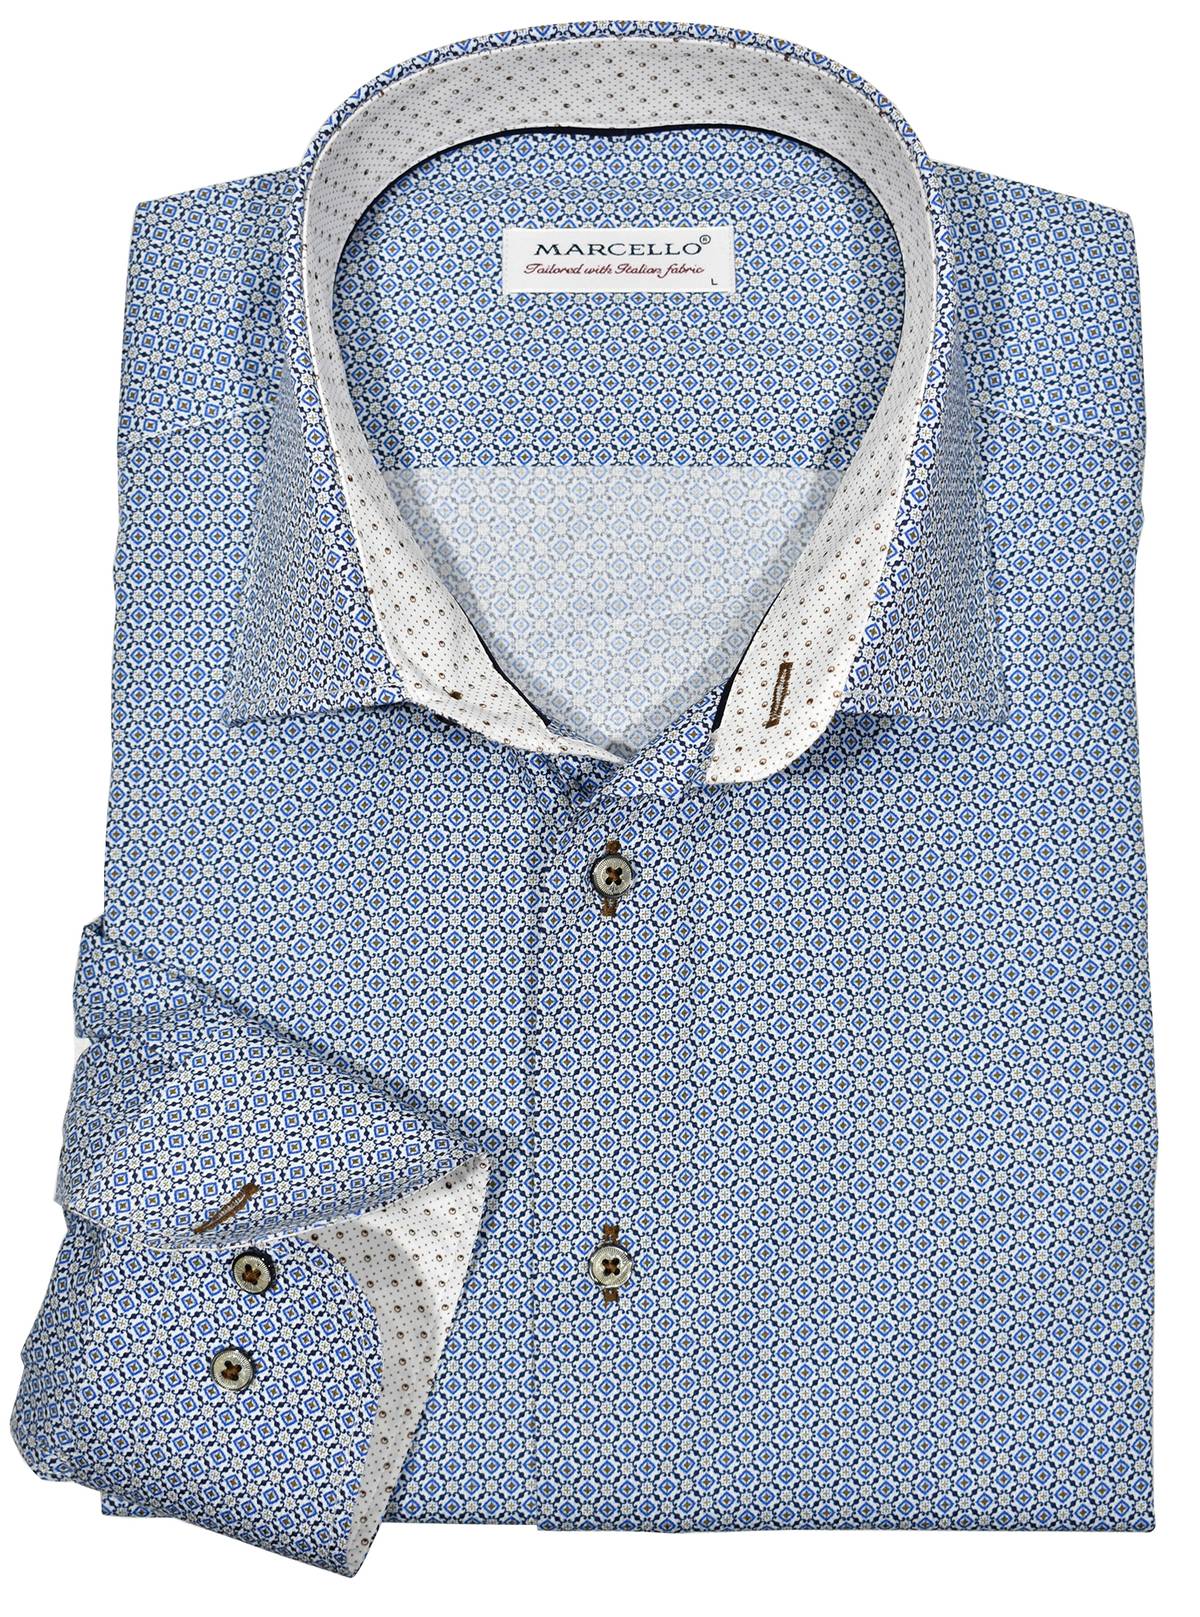 The Marcello exclusive 1 piece roll collar will look significantly better than your normal shirts.  The collar stands perfectly, the button placket doesn't curl and the image it displays is sophistication.  The cotton fabric and neat traditional pattern add to the overall style.   Custom buttons and stitching.  Second cuff placket button for the perfect cuff turn up.  Classic shaped fit.